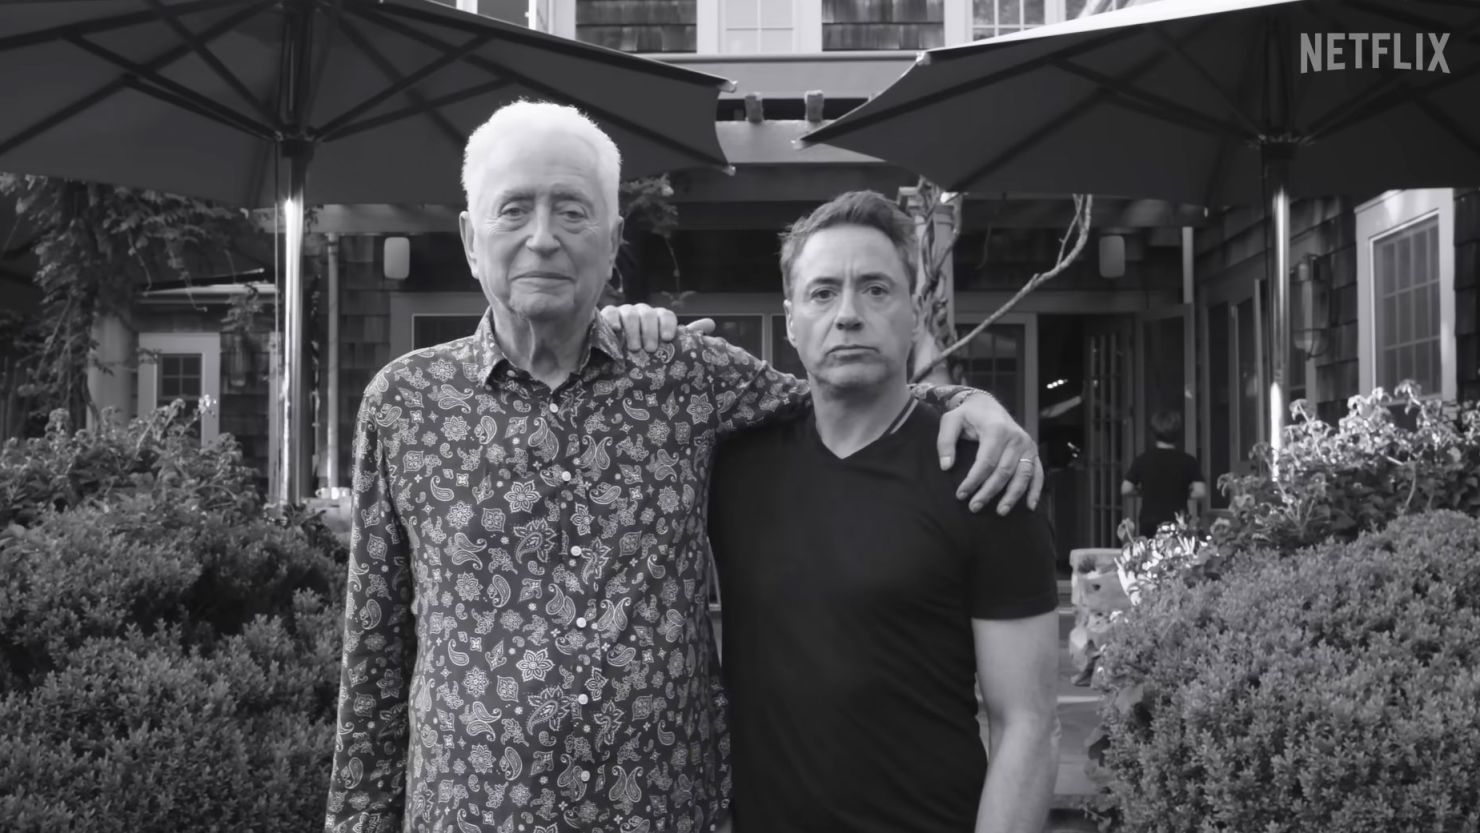 Sr.' review: Robert Downey Jr. deals with his late dad in an intimate  Netflix documentary